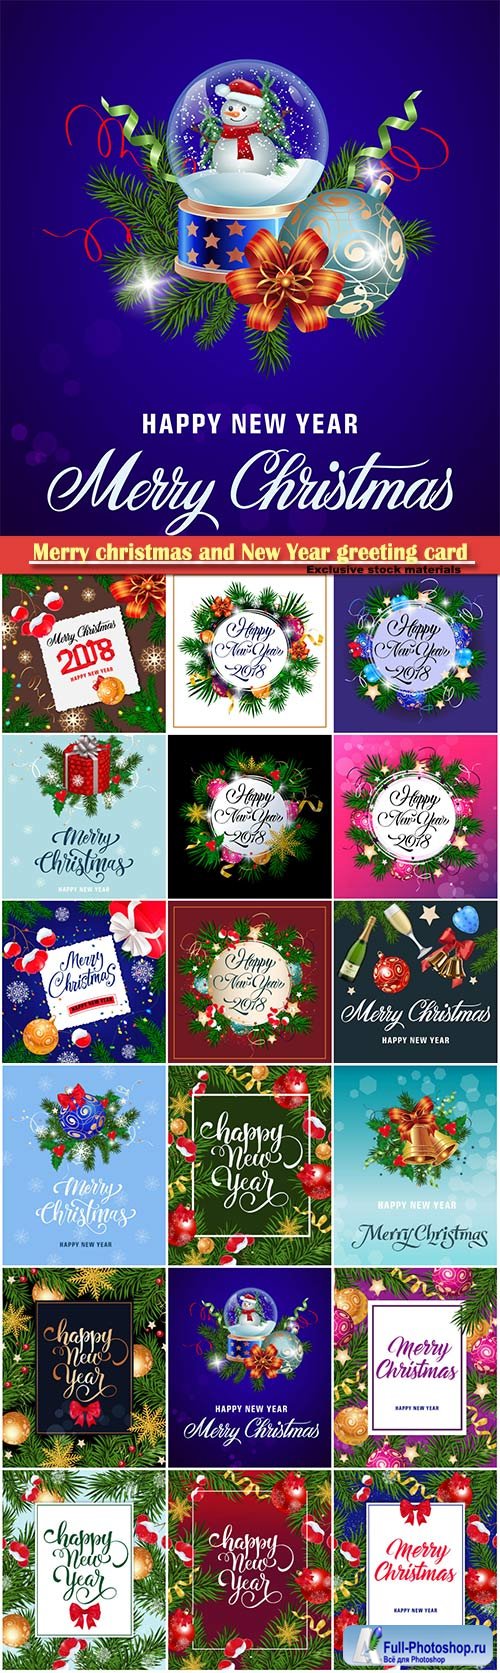 Merry christmas and New Year greeting card vector # 25